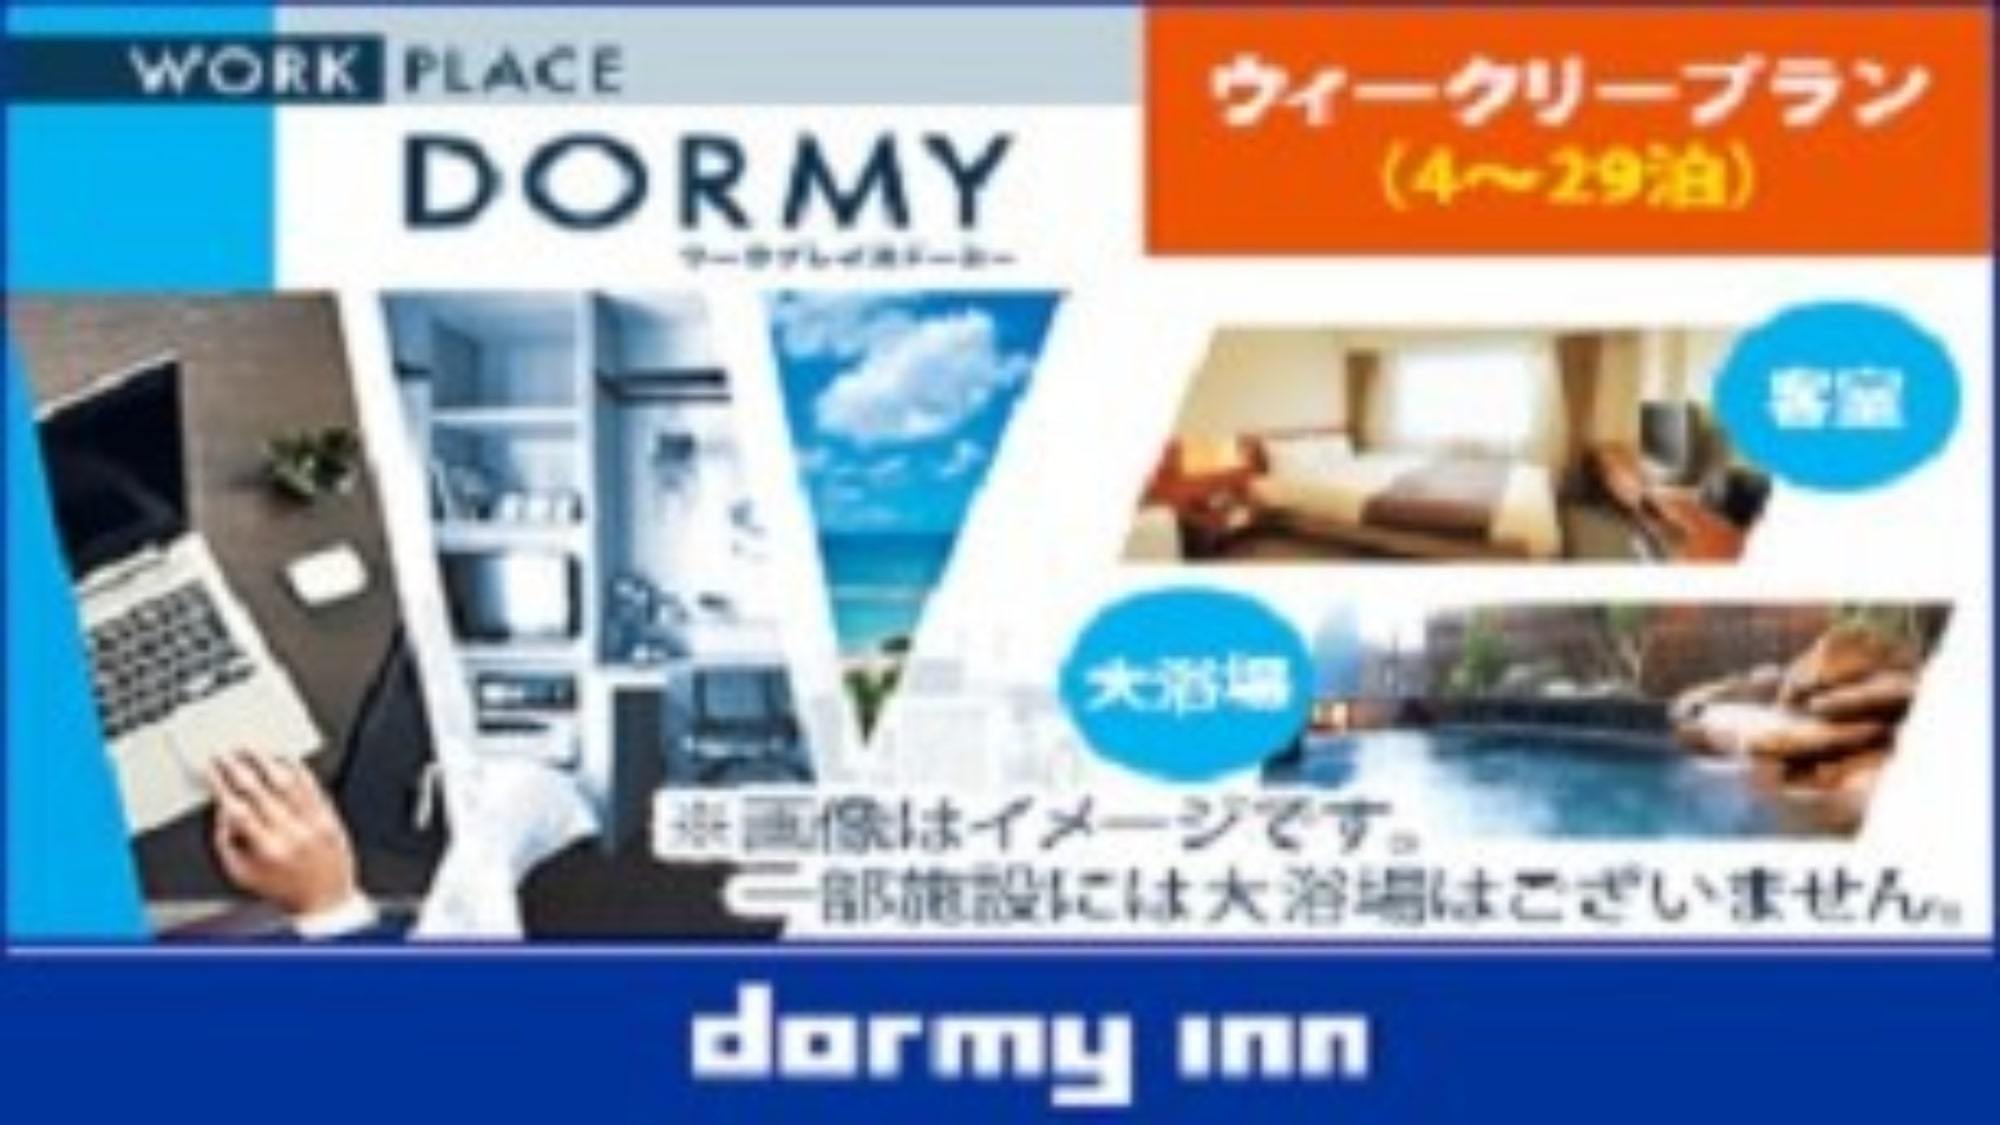 【WORK PLACE DORMY】ウィークリープラン（4〜29泊）《素泊》